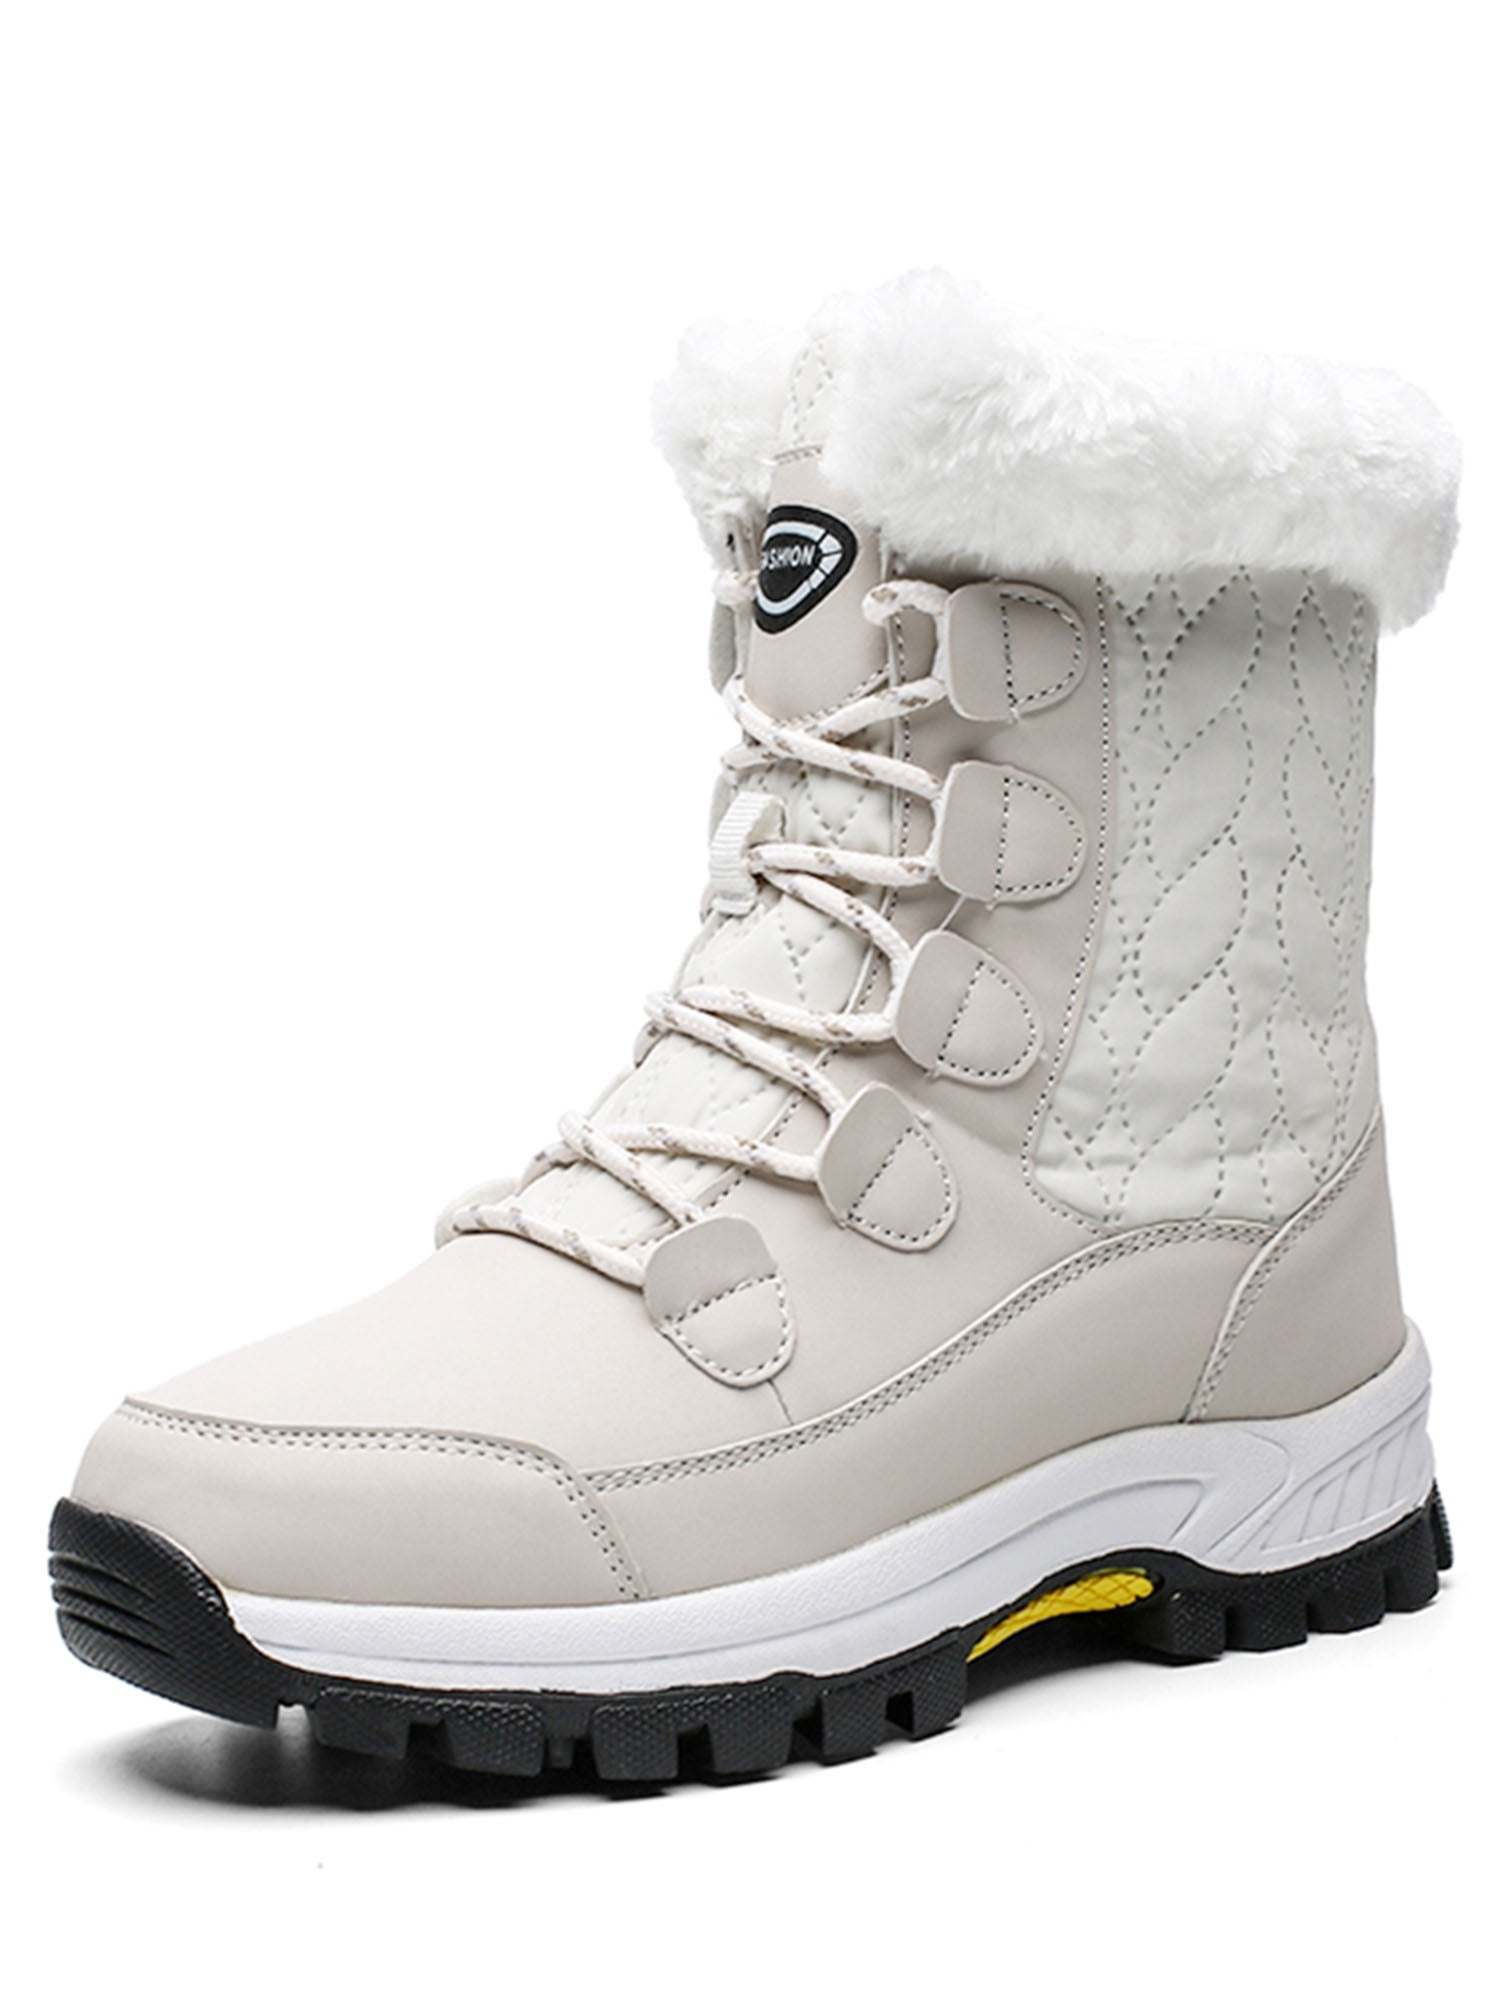 Womens Fur Linned Boots Winter Warm Combat Hiking Work High Top Ankle Shoes Size